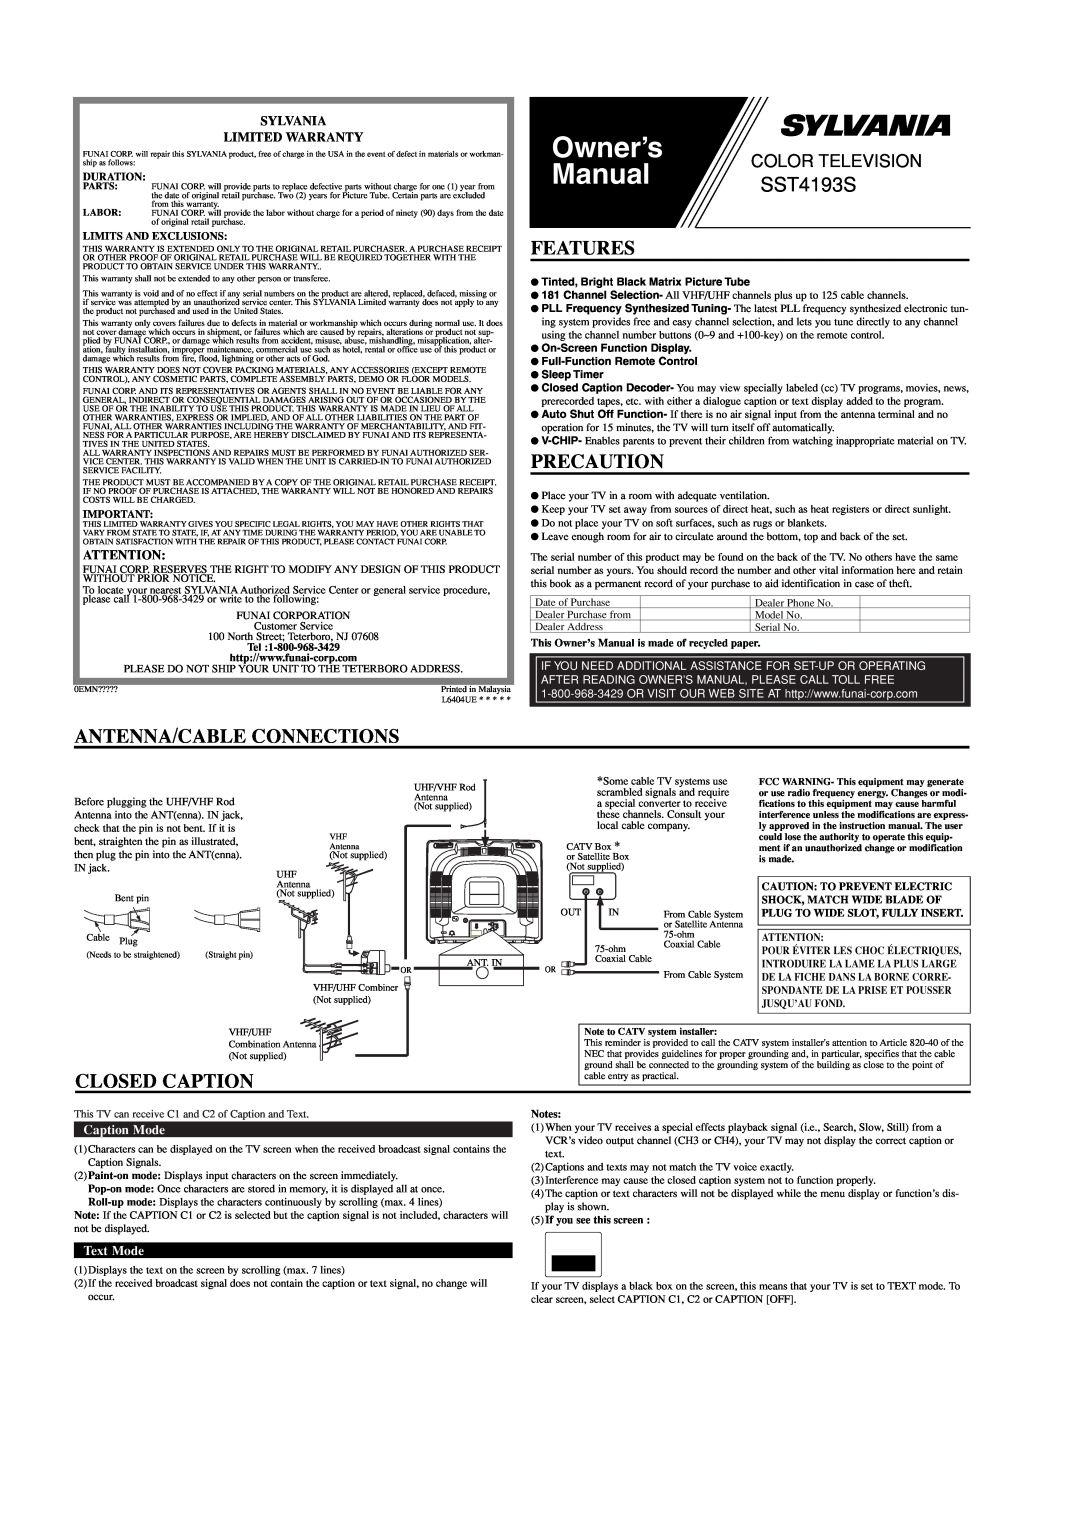 Sylvania SST4193S owner manual Features, Precaution, Antenna/Cable Connections, Closed Caption, Sylvania Limited Warranty 